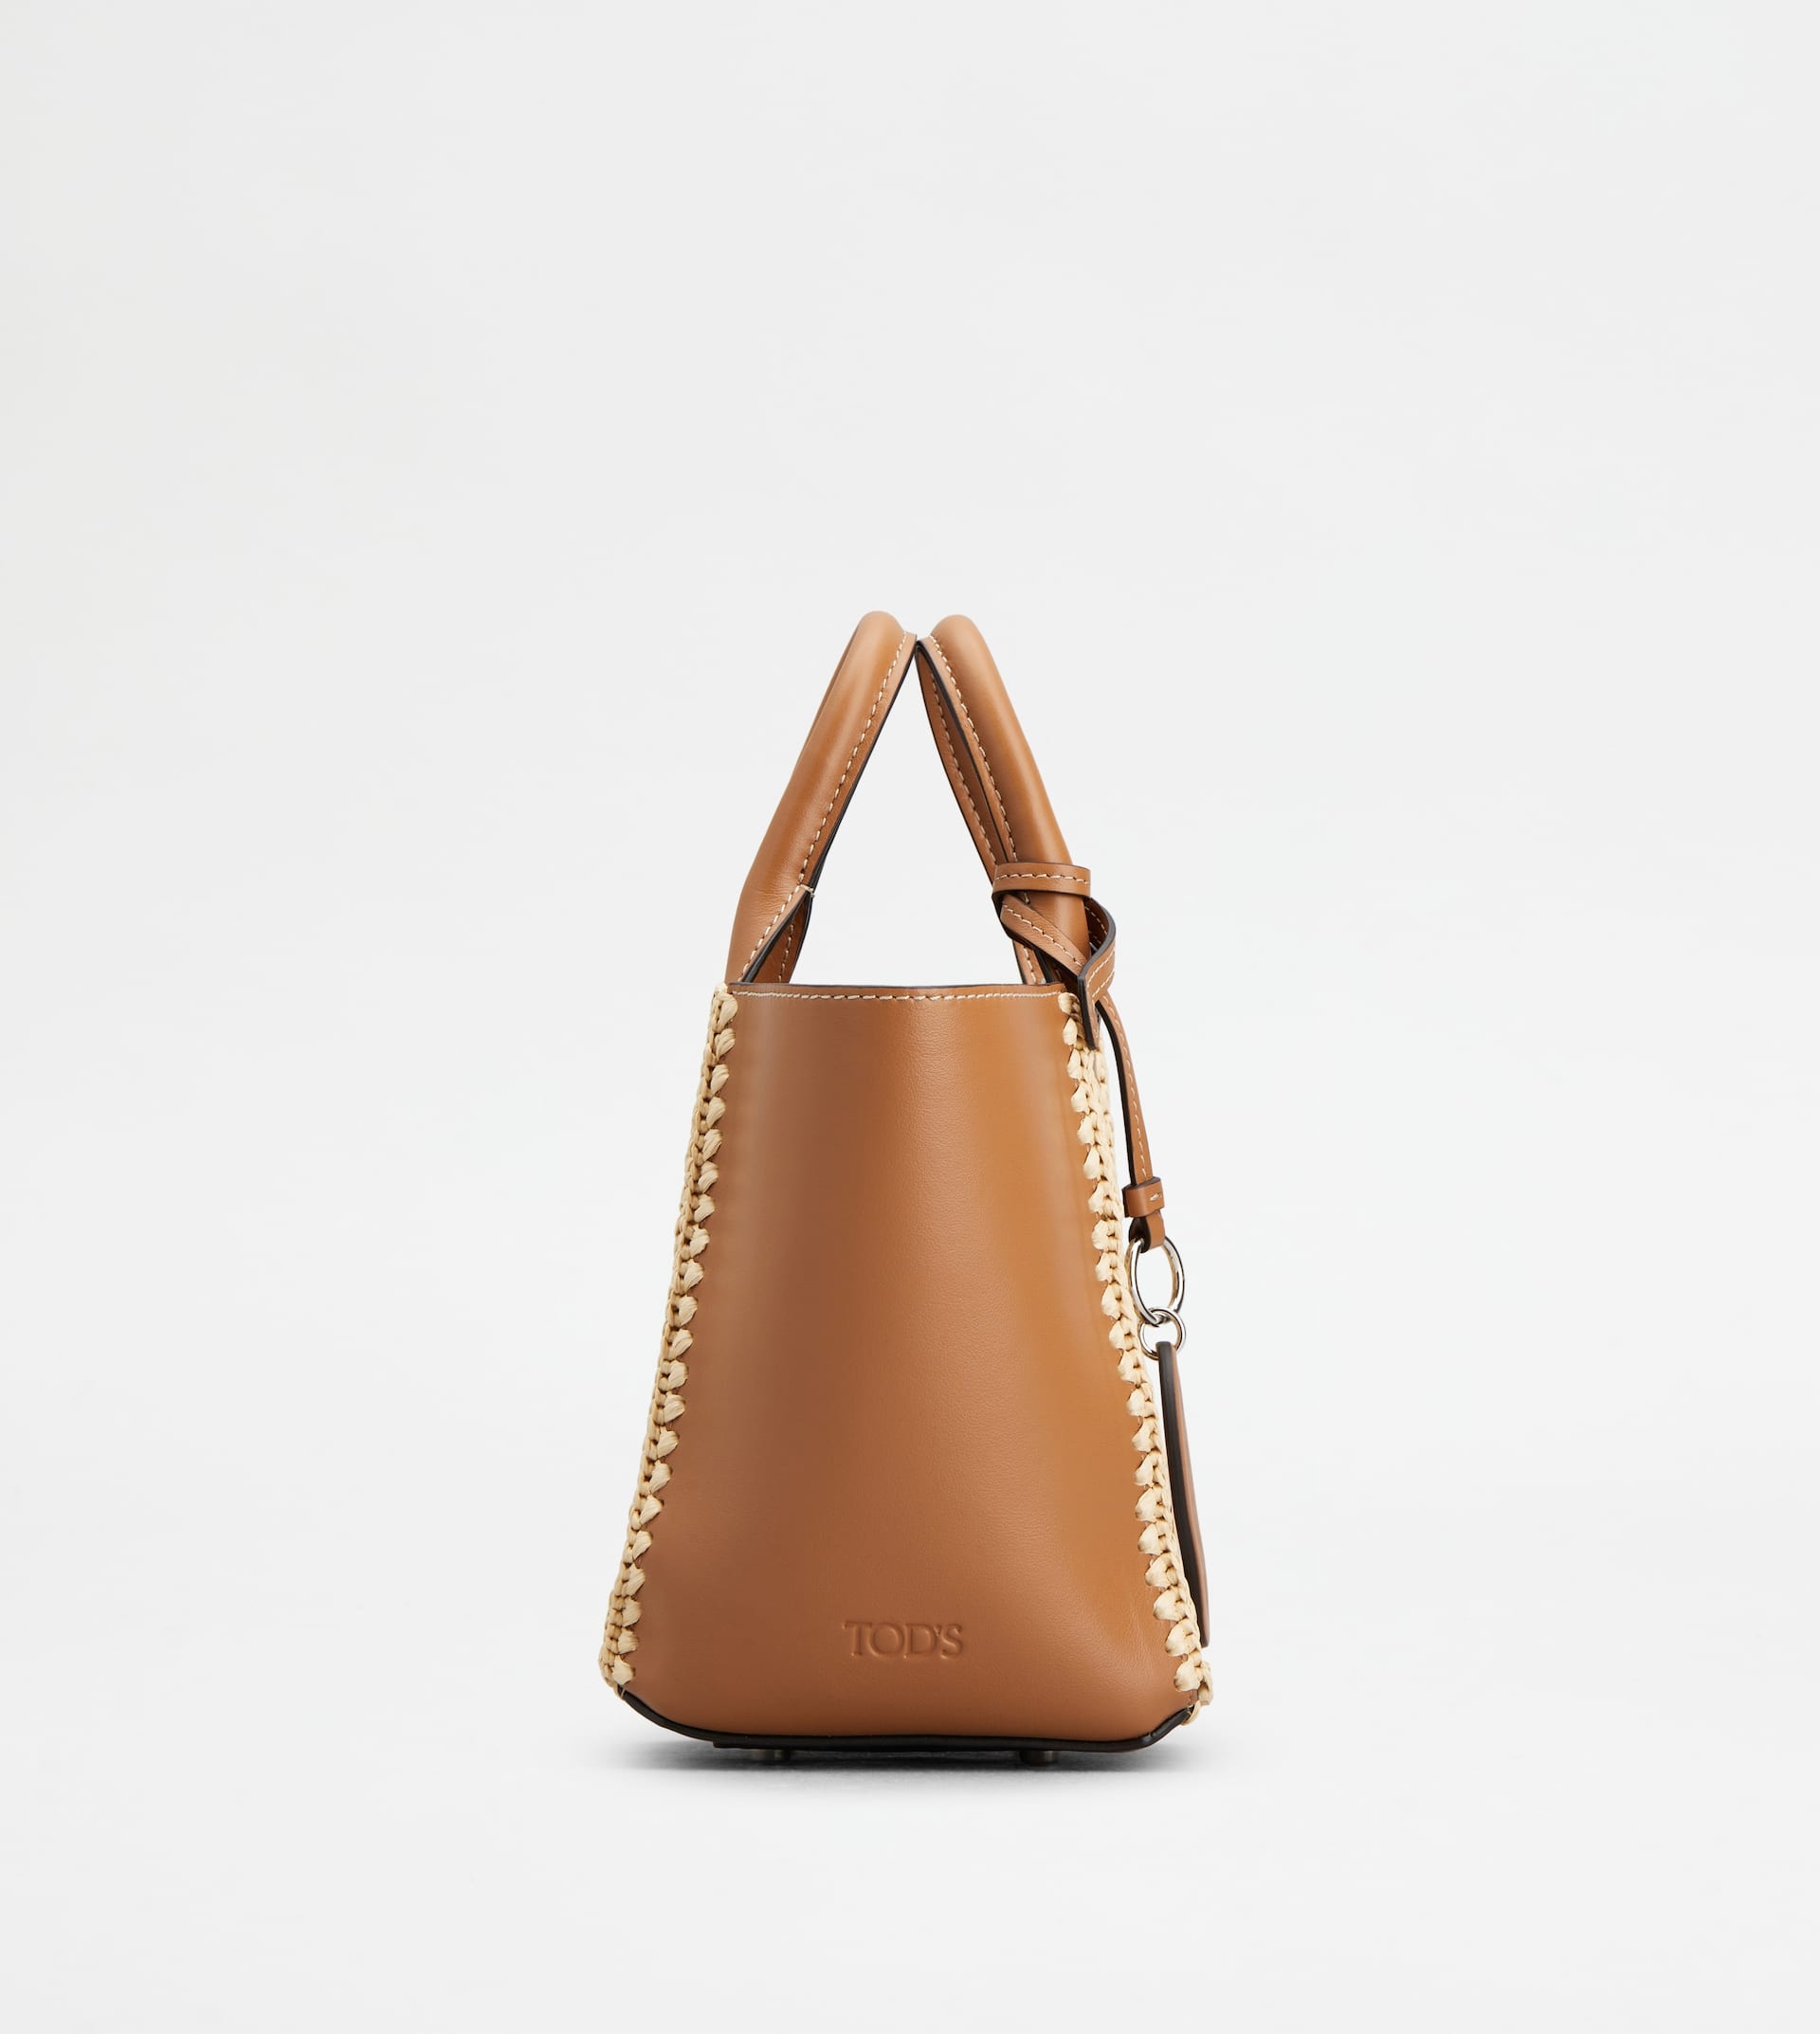 TOD'S DOUBLE UP SHOPPING BAG IN LEATHER AND RAFFIA MINI - BEIGE, BROWN - 2